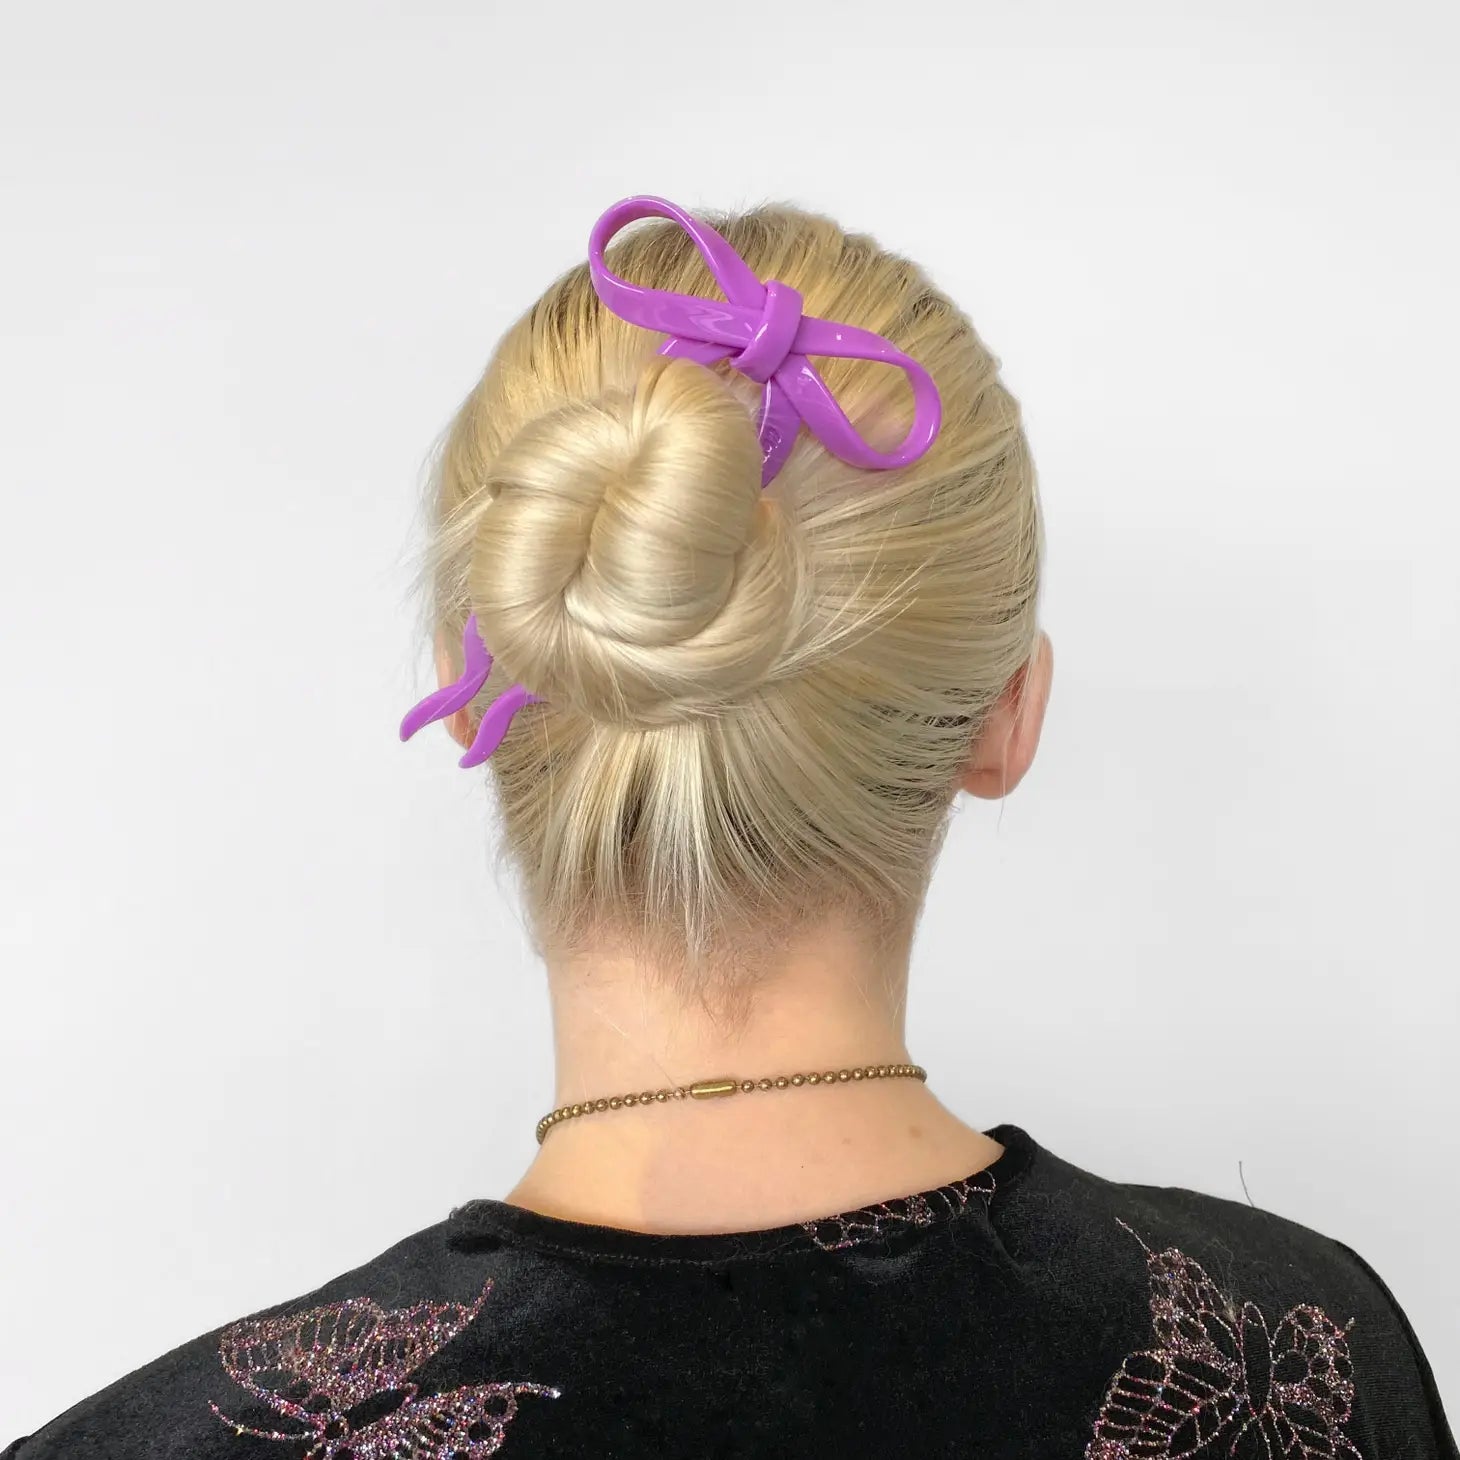 Chunks |Large Bow Hairpin in Orchid | Prelude & Dawn | Los Angeles, CA